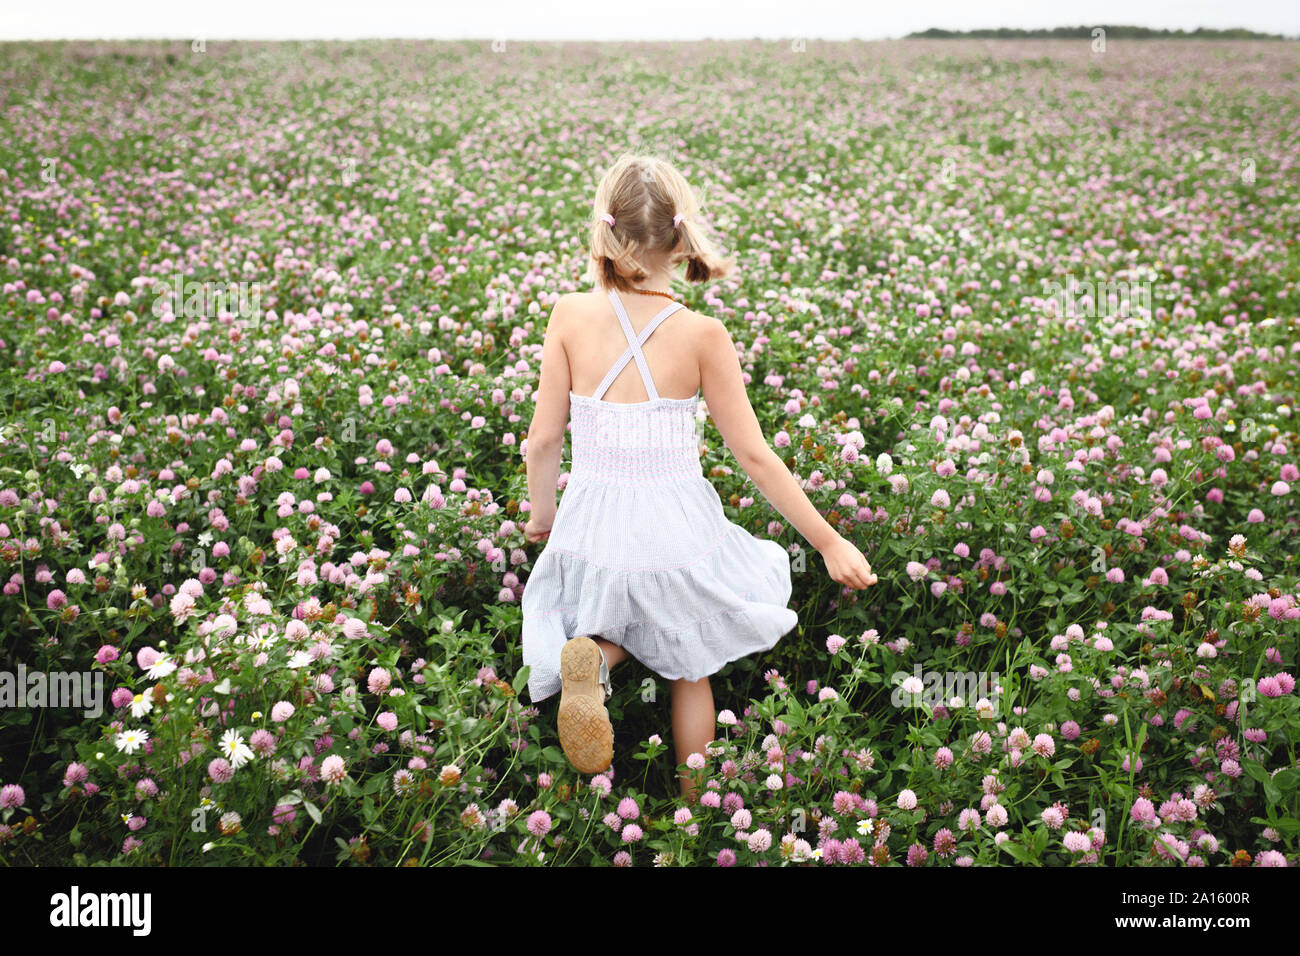 Rear view of a girl with braids running on clover field Stock Photo